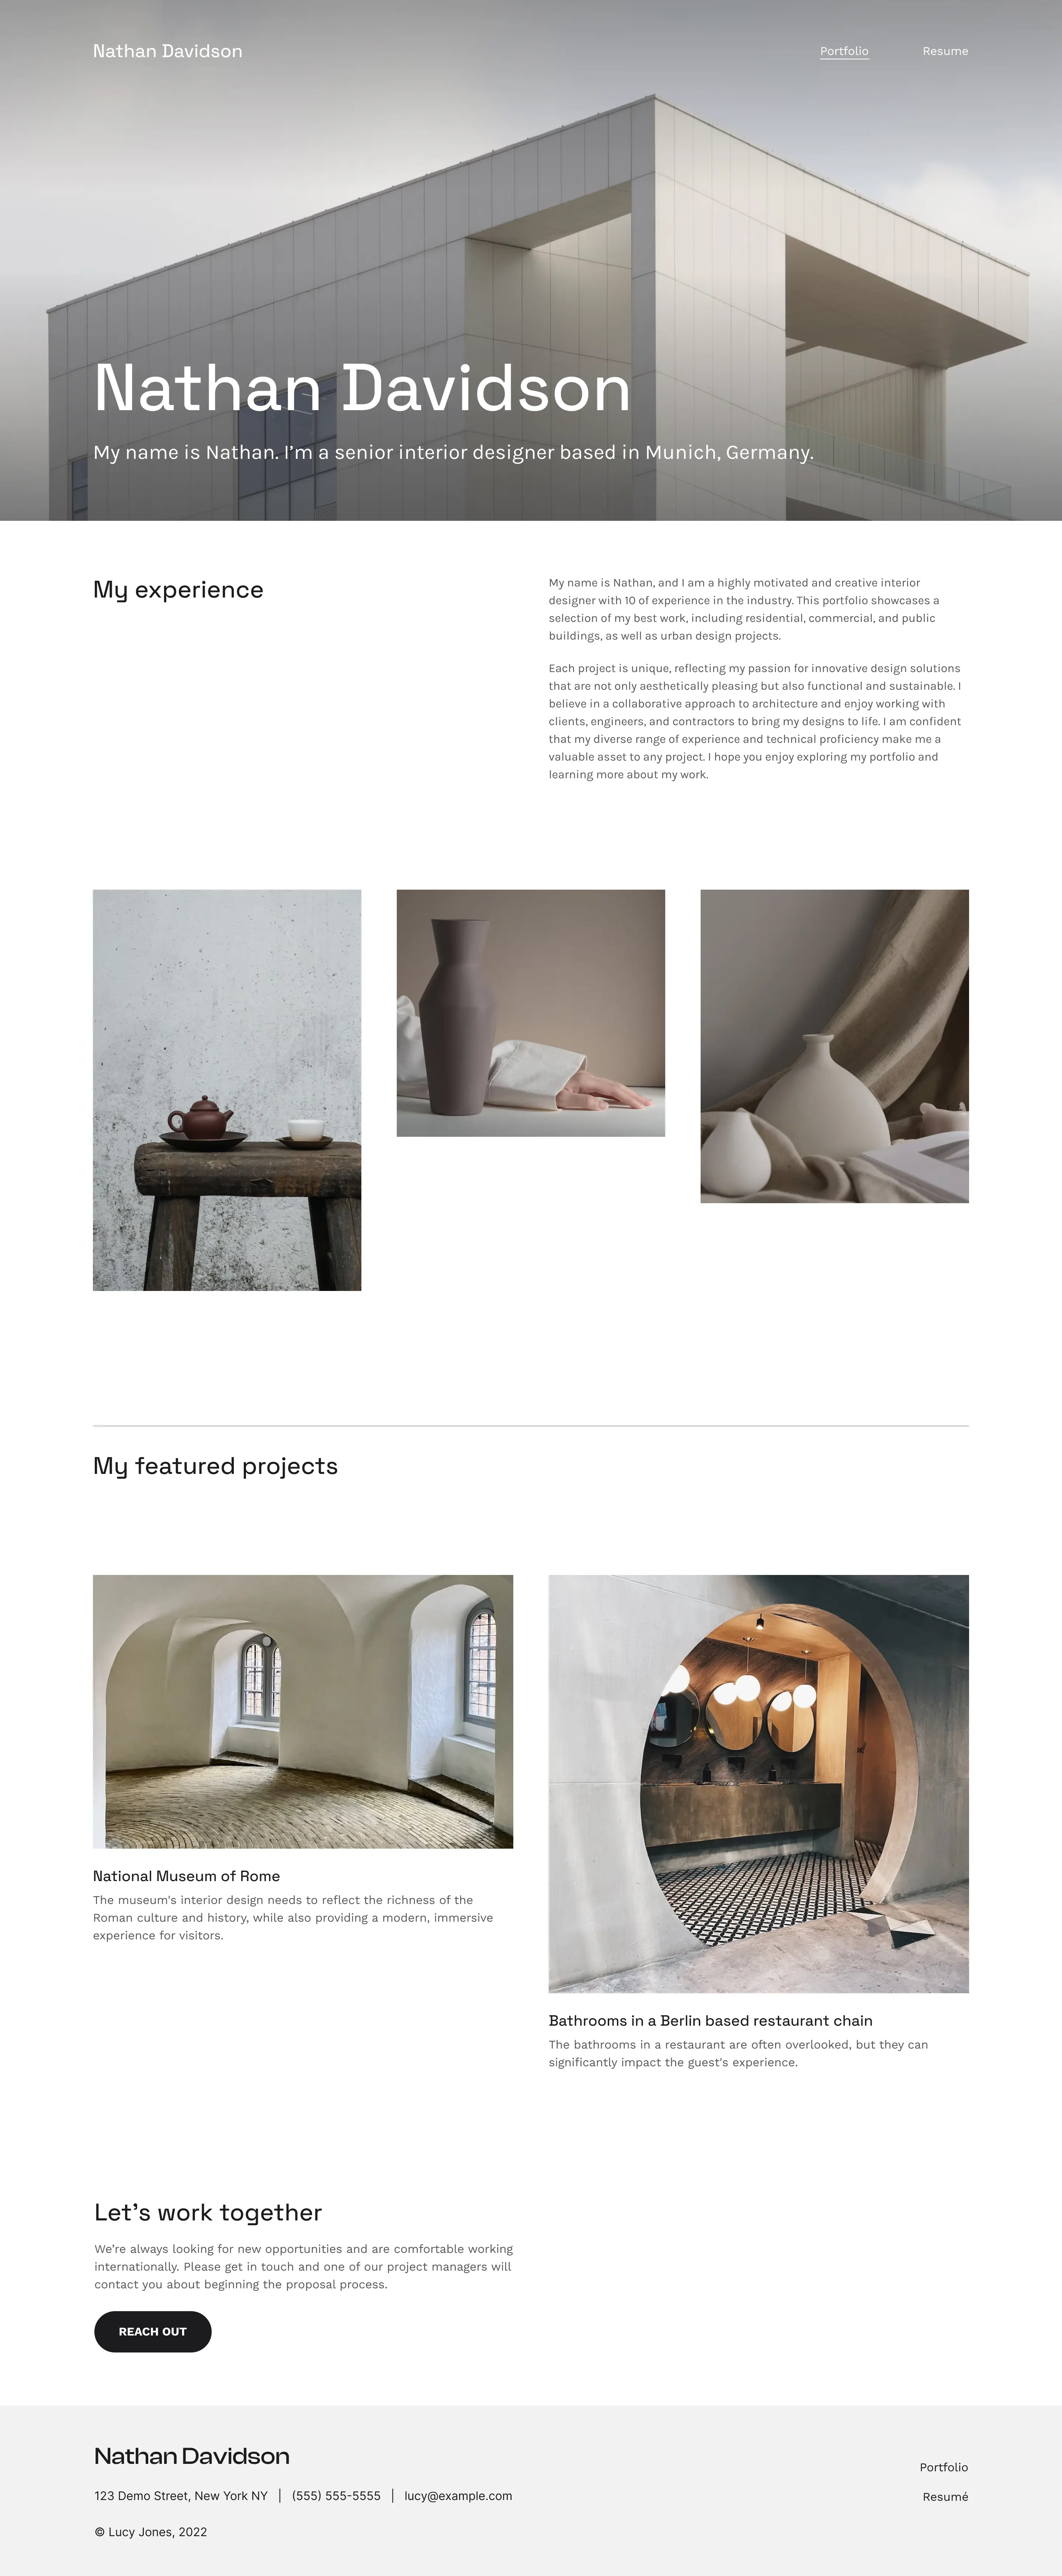 An architecture portfolio website example made with Archifolio